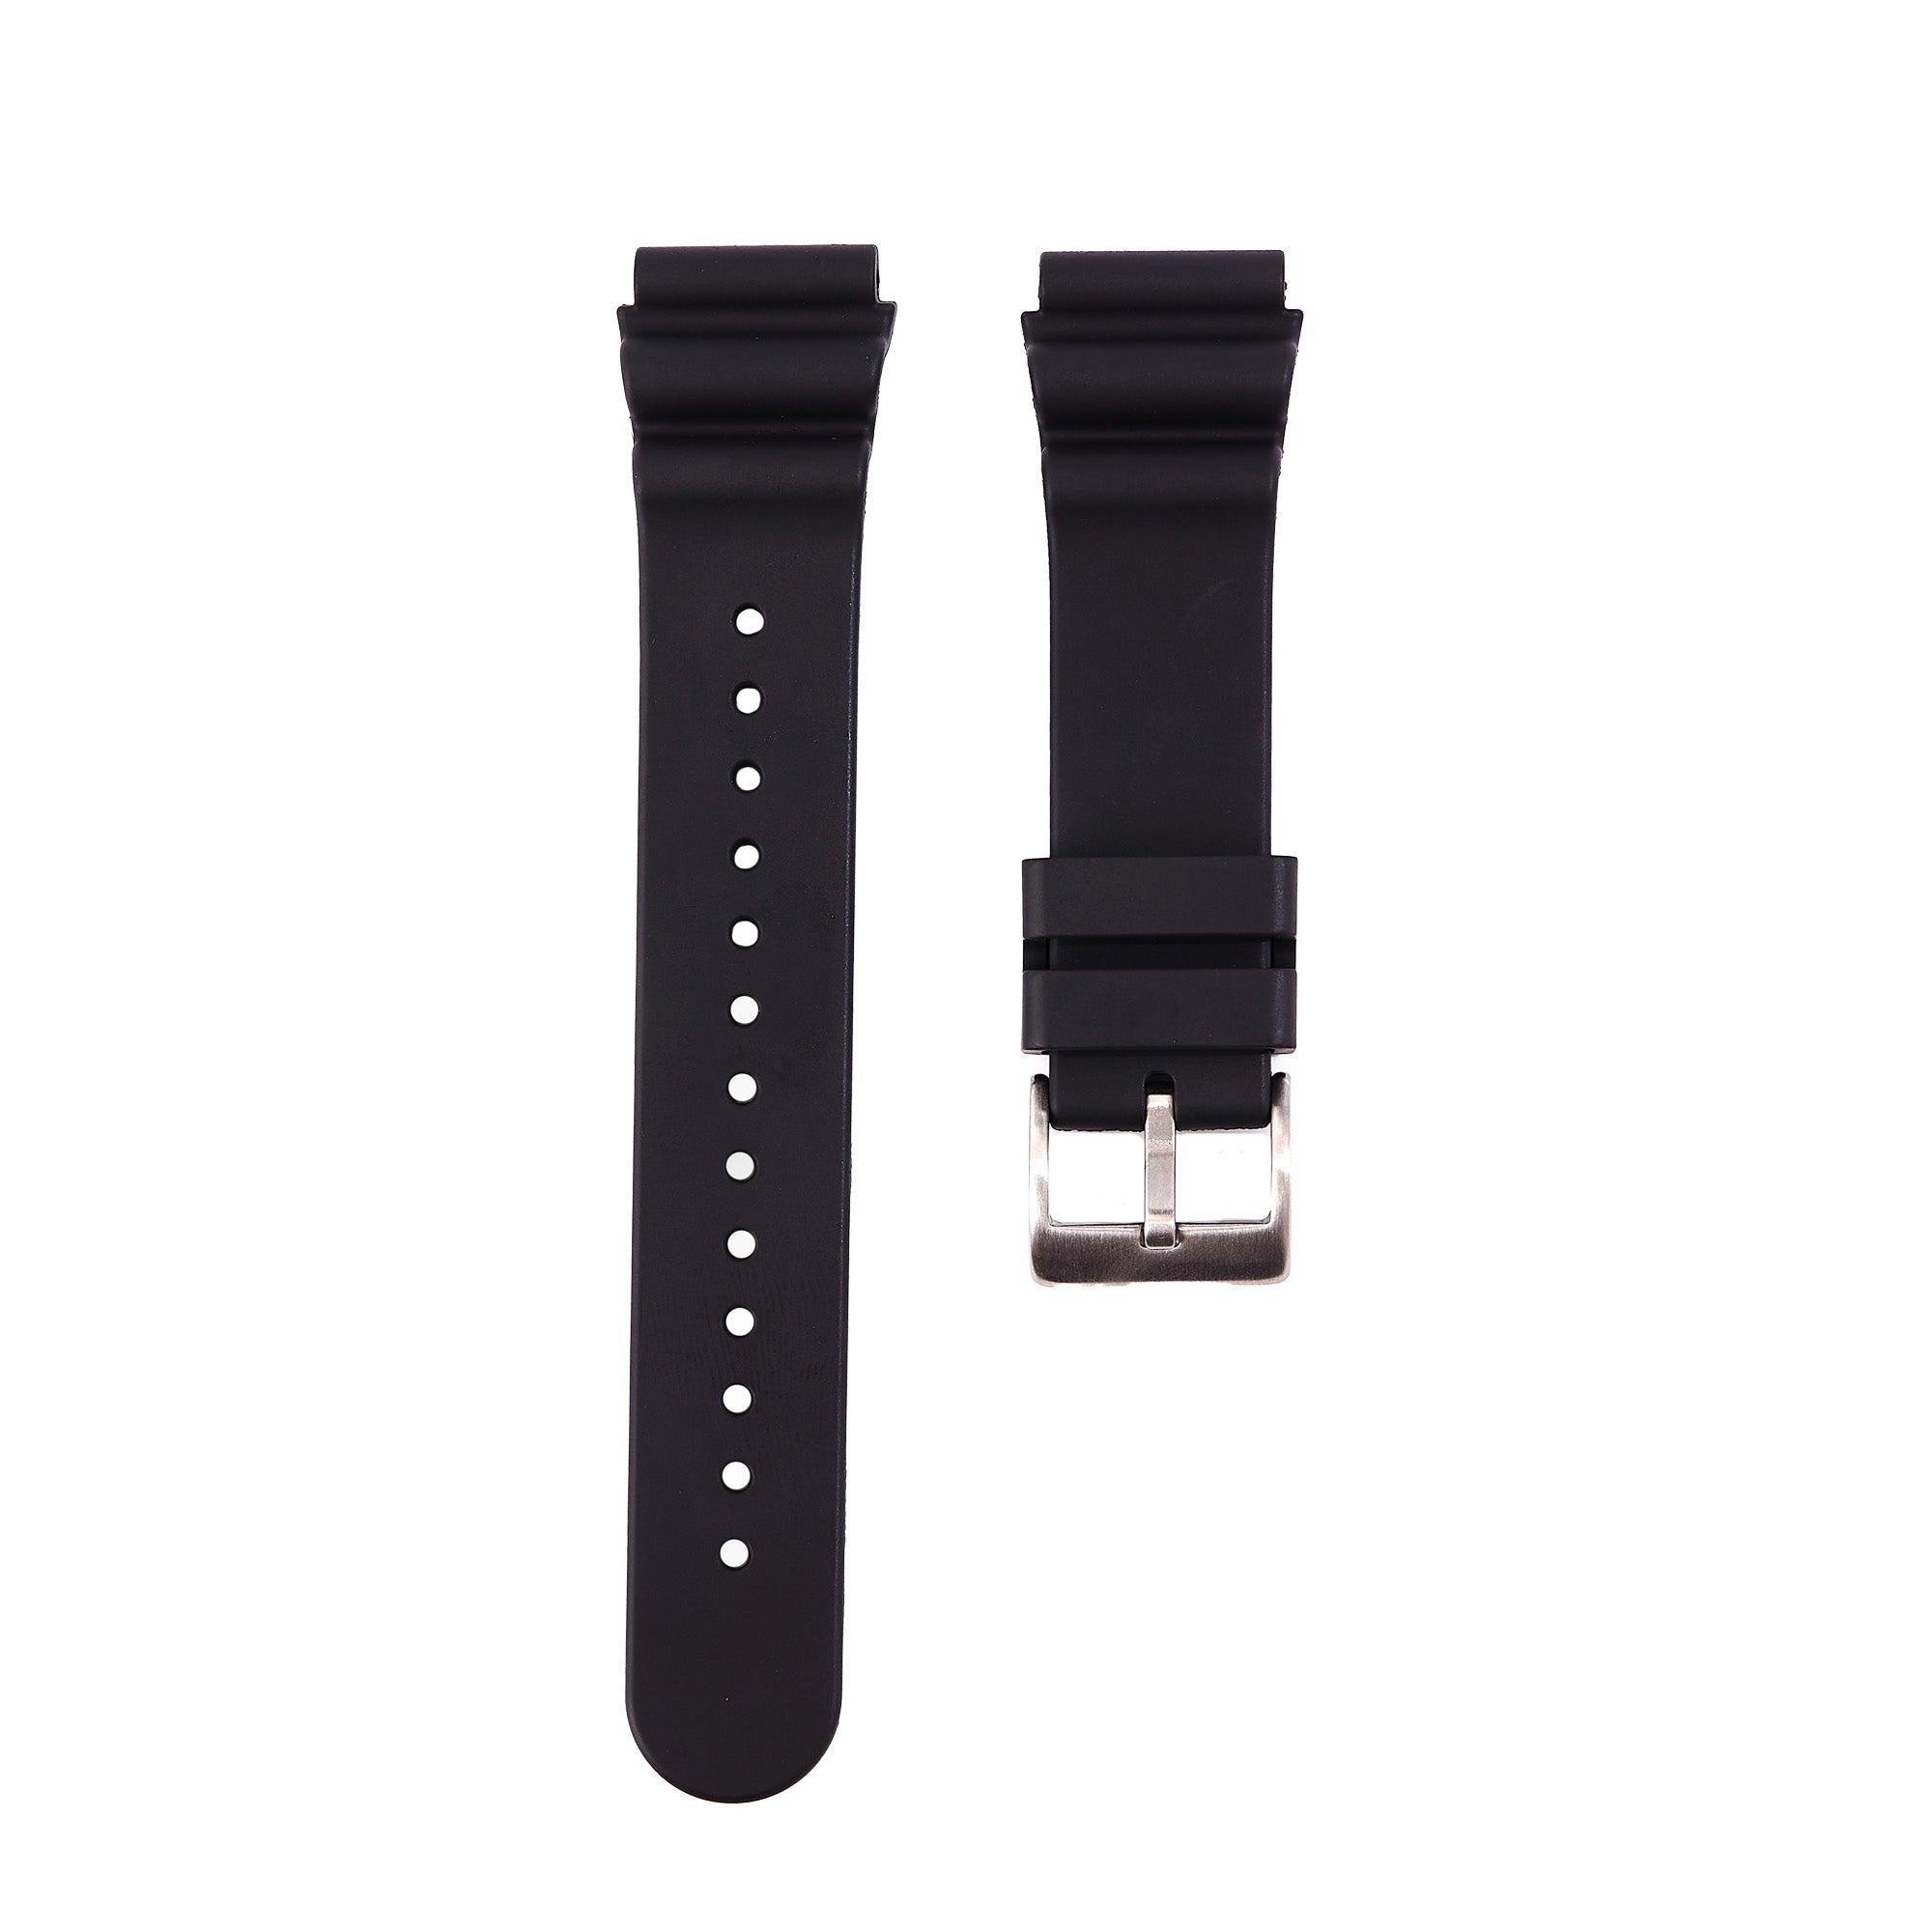 Wave FKM Rubber Strap-Compatible with Seiko Watches-Black (2413)